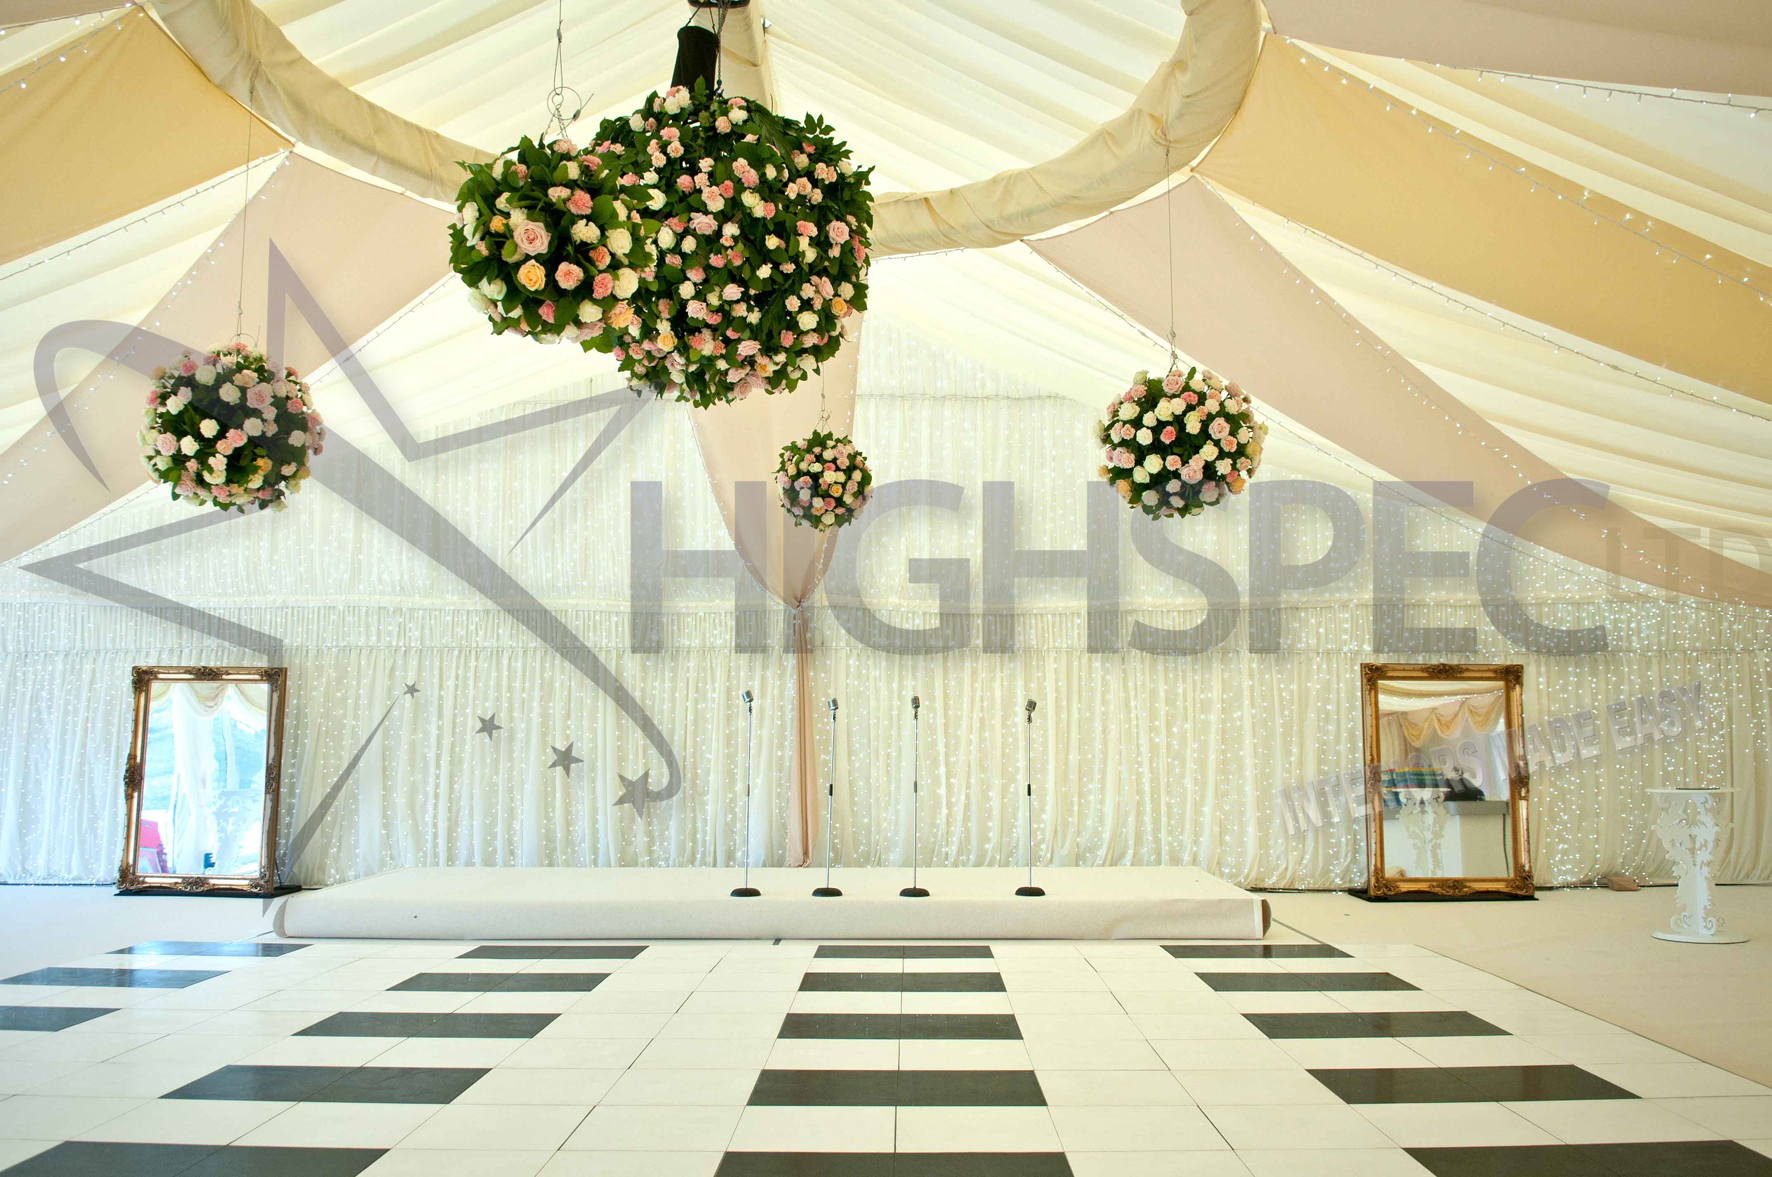 Pleated marquee lining decor